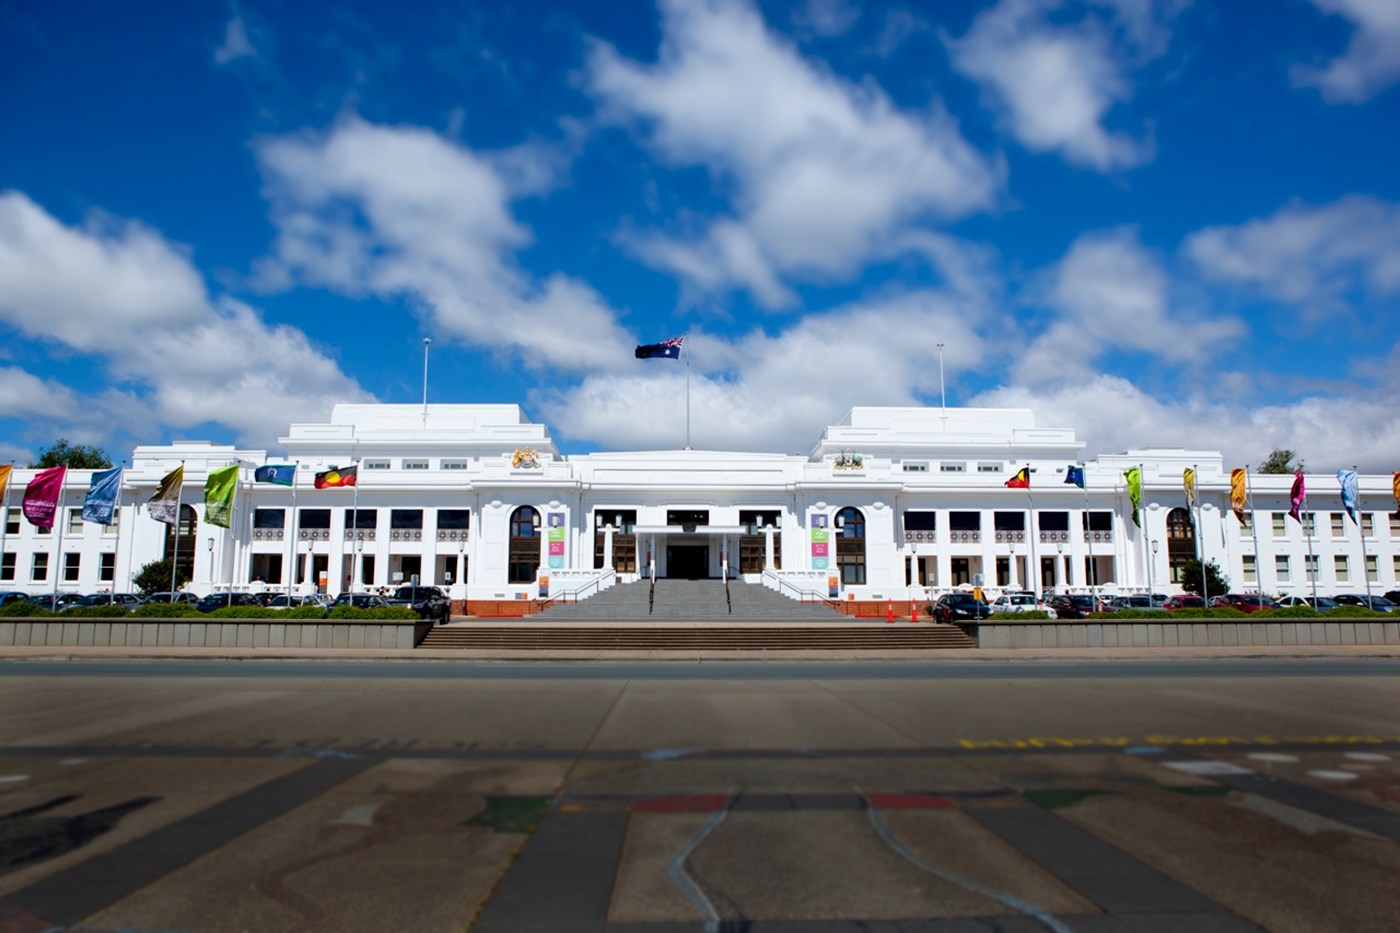 Museum of Australian Democracy at Old Parliament House